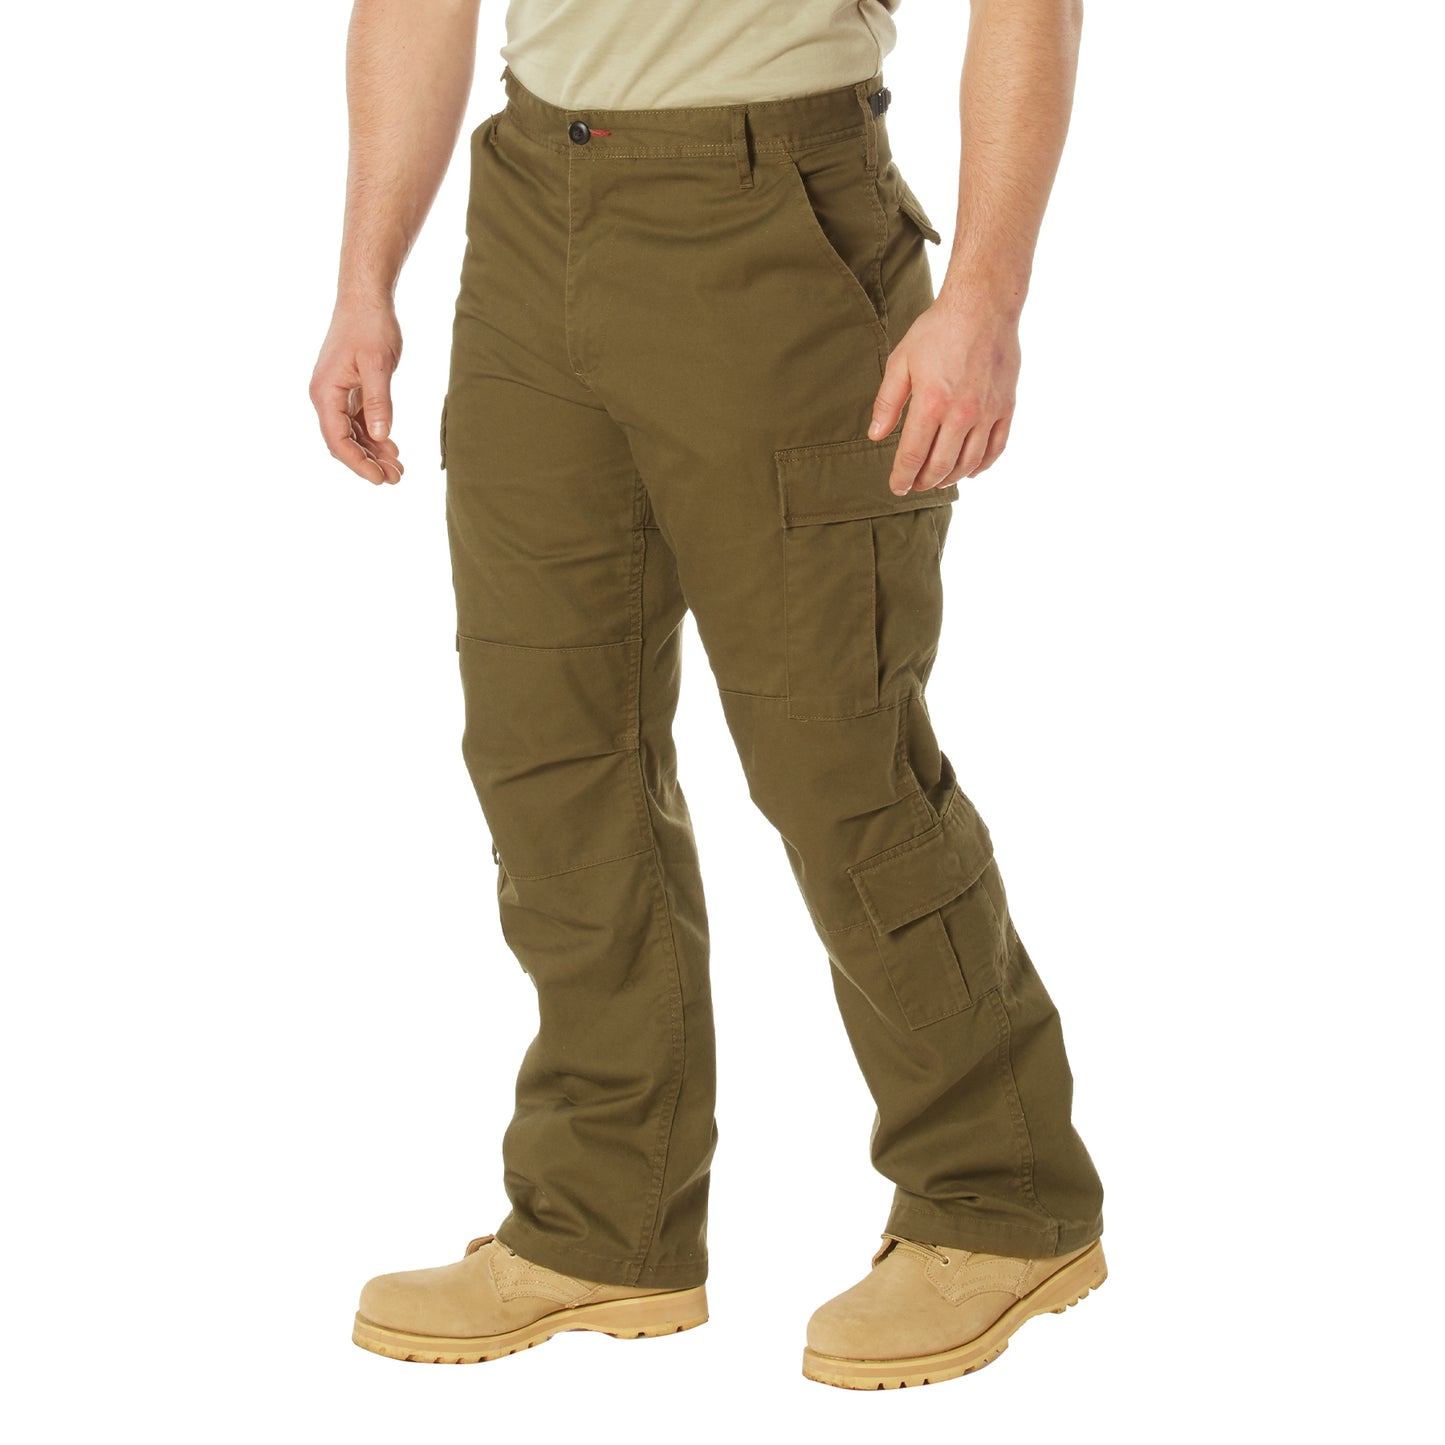 Rothco Vintage Paratrooper Fatigue Pants - Russet Brown